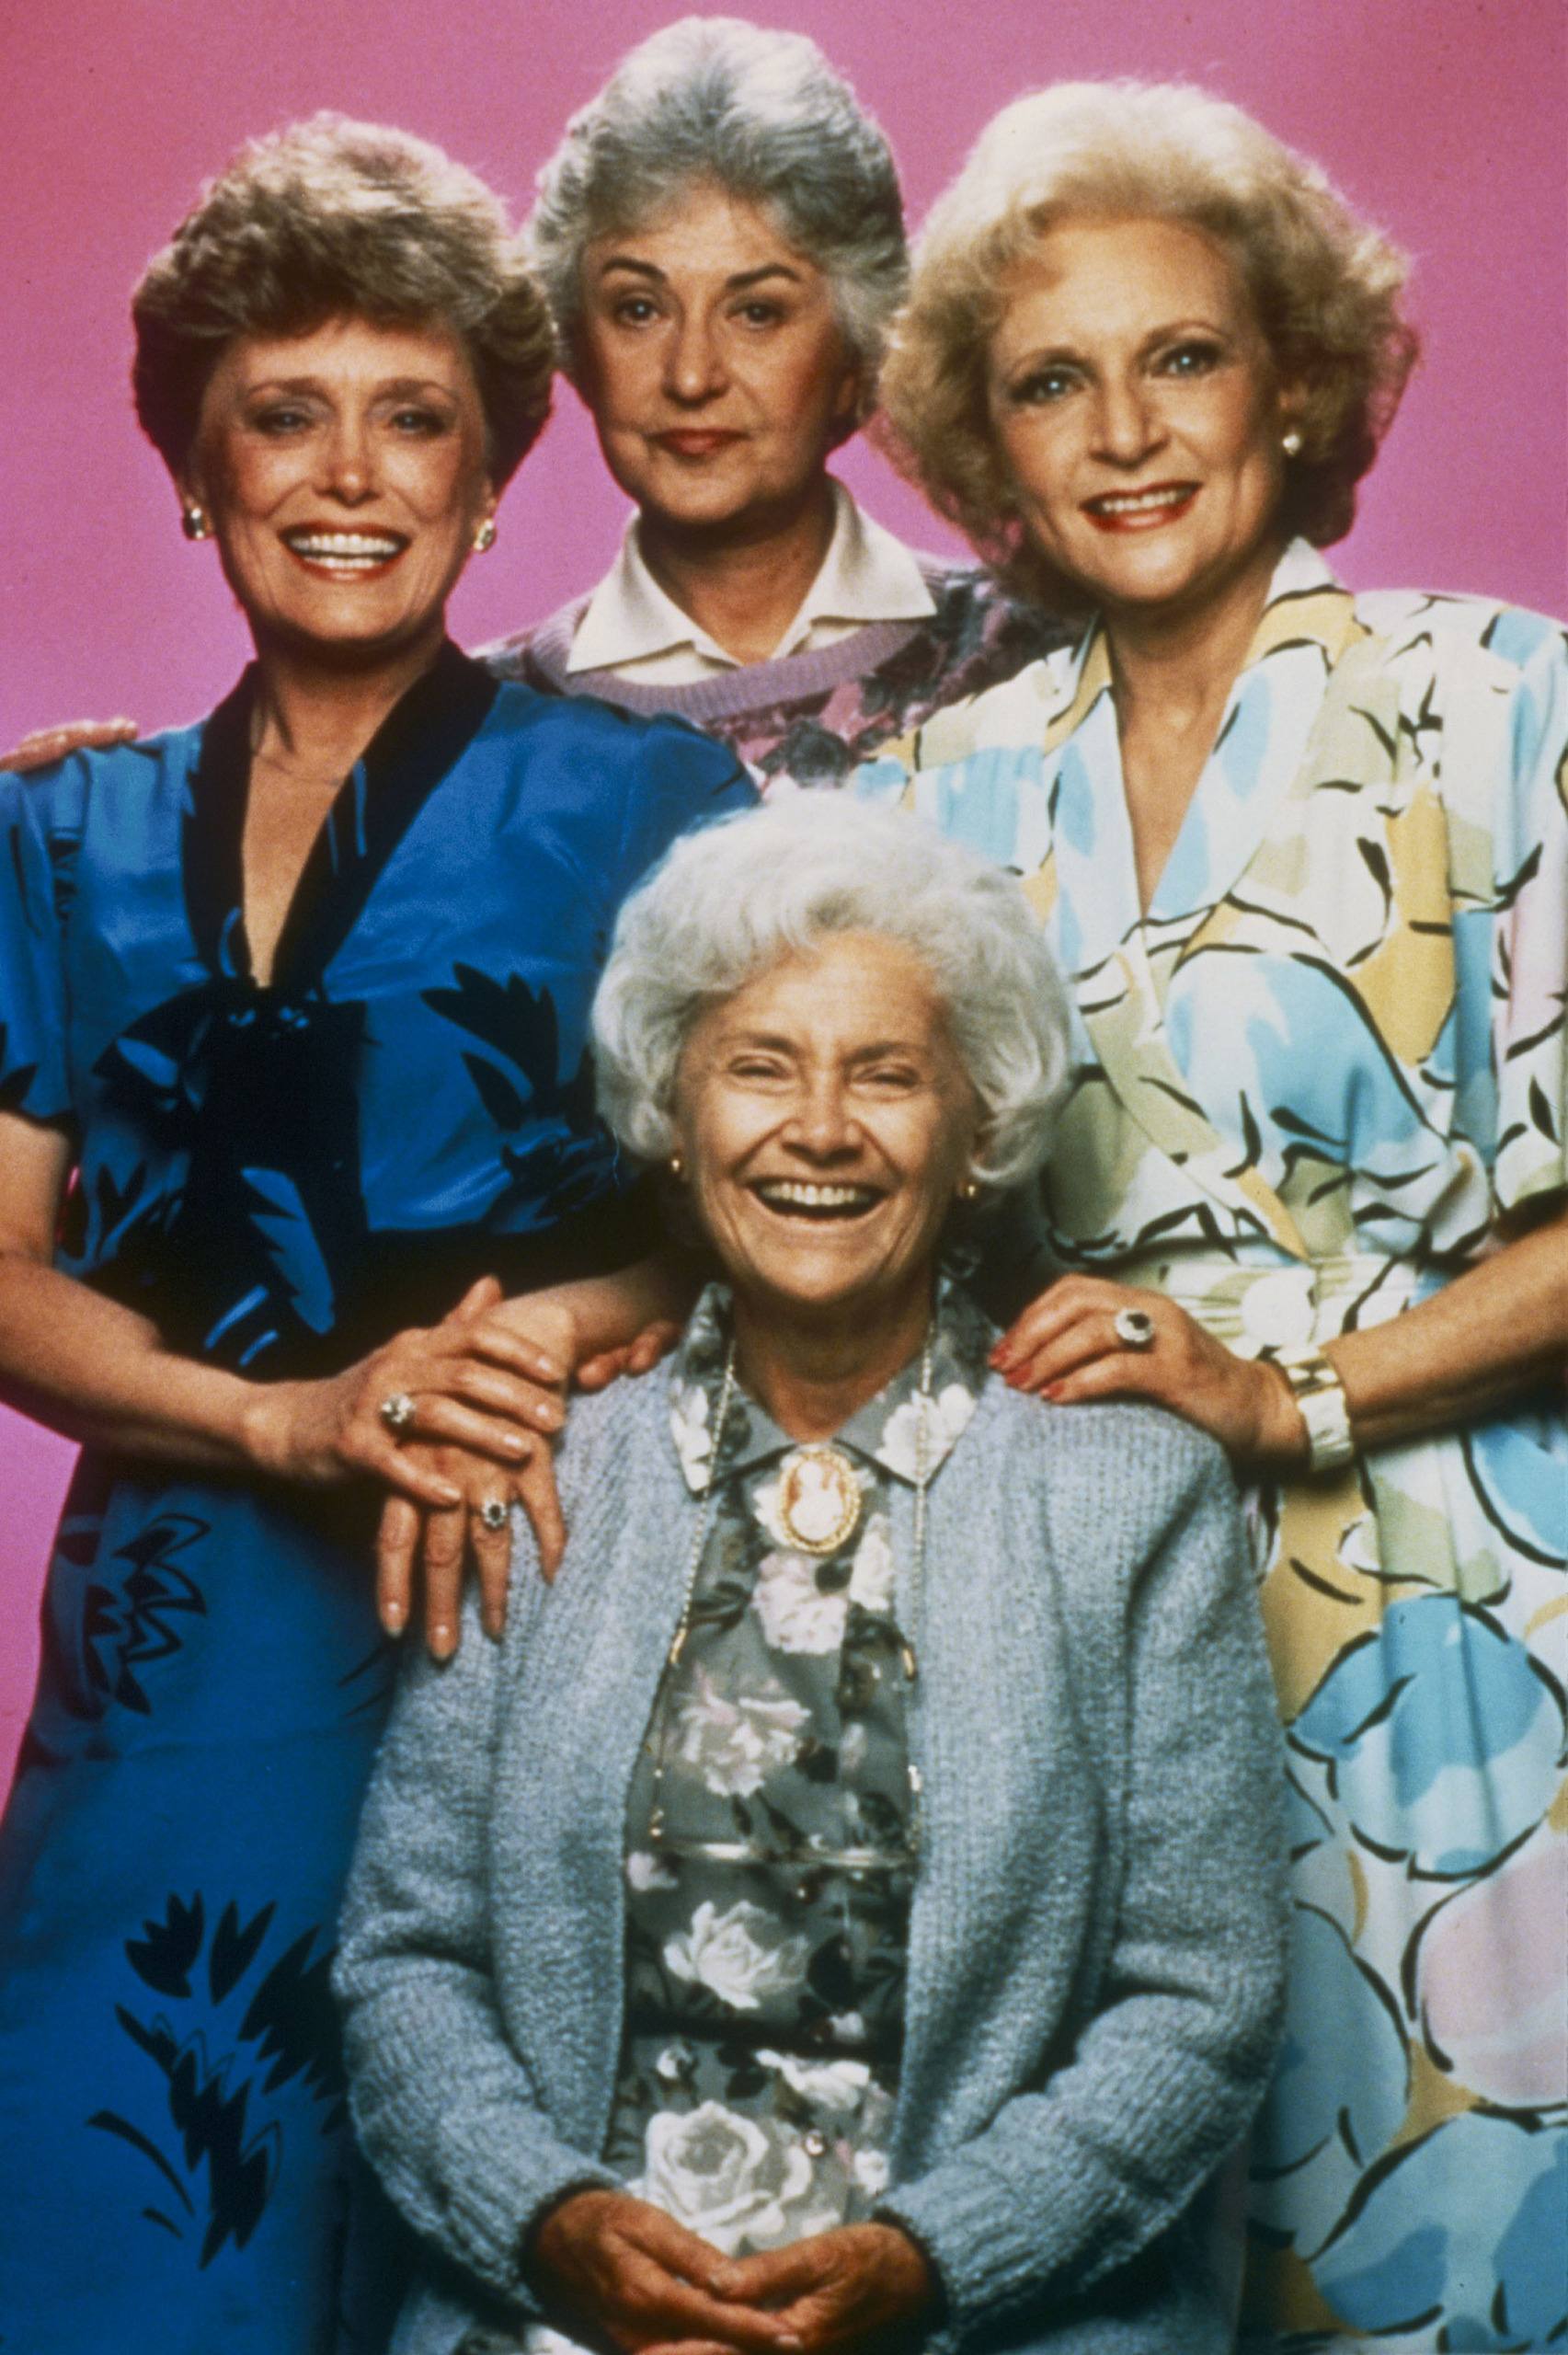 The Golden Girls Image HD Wallpaper And